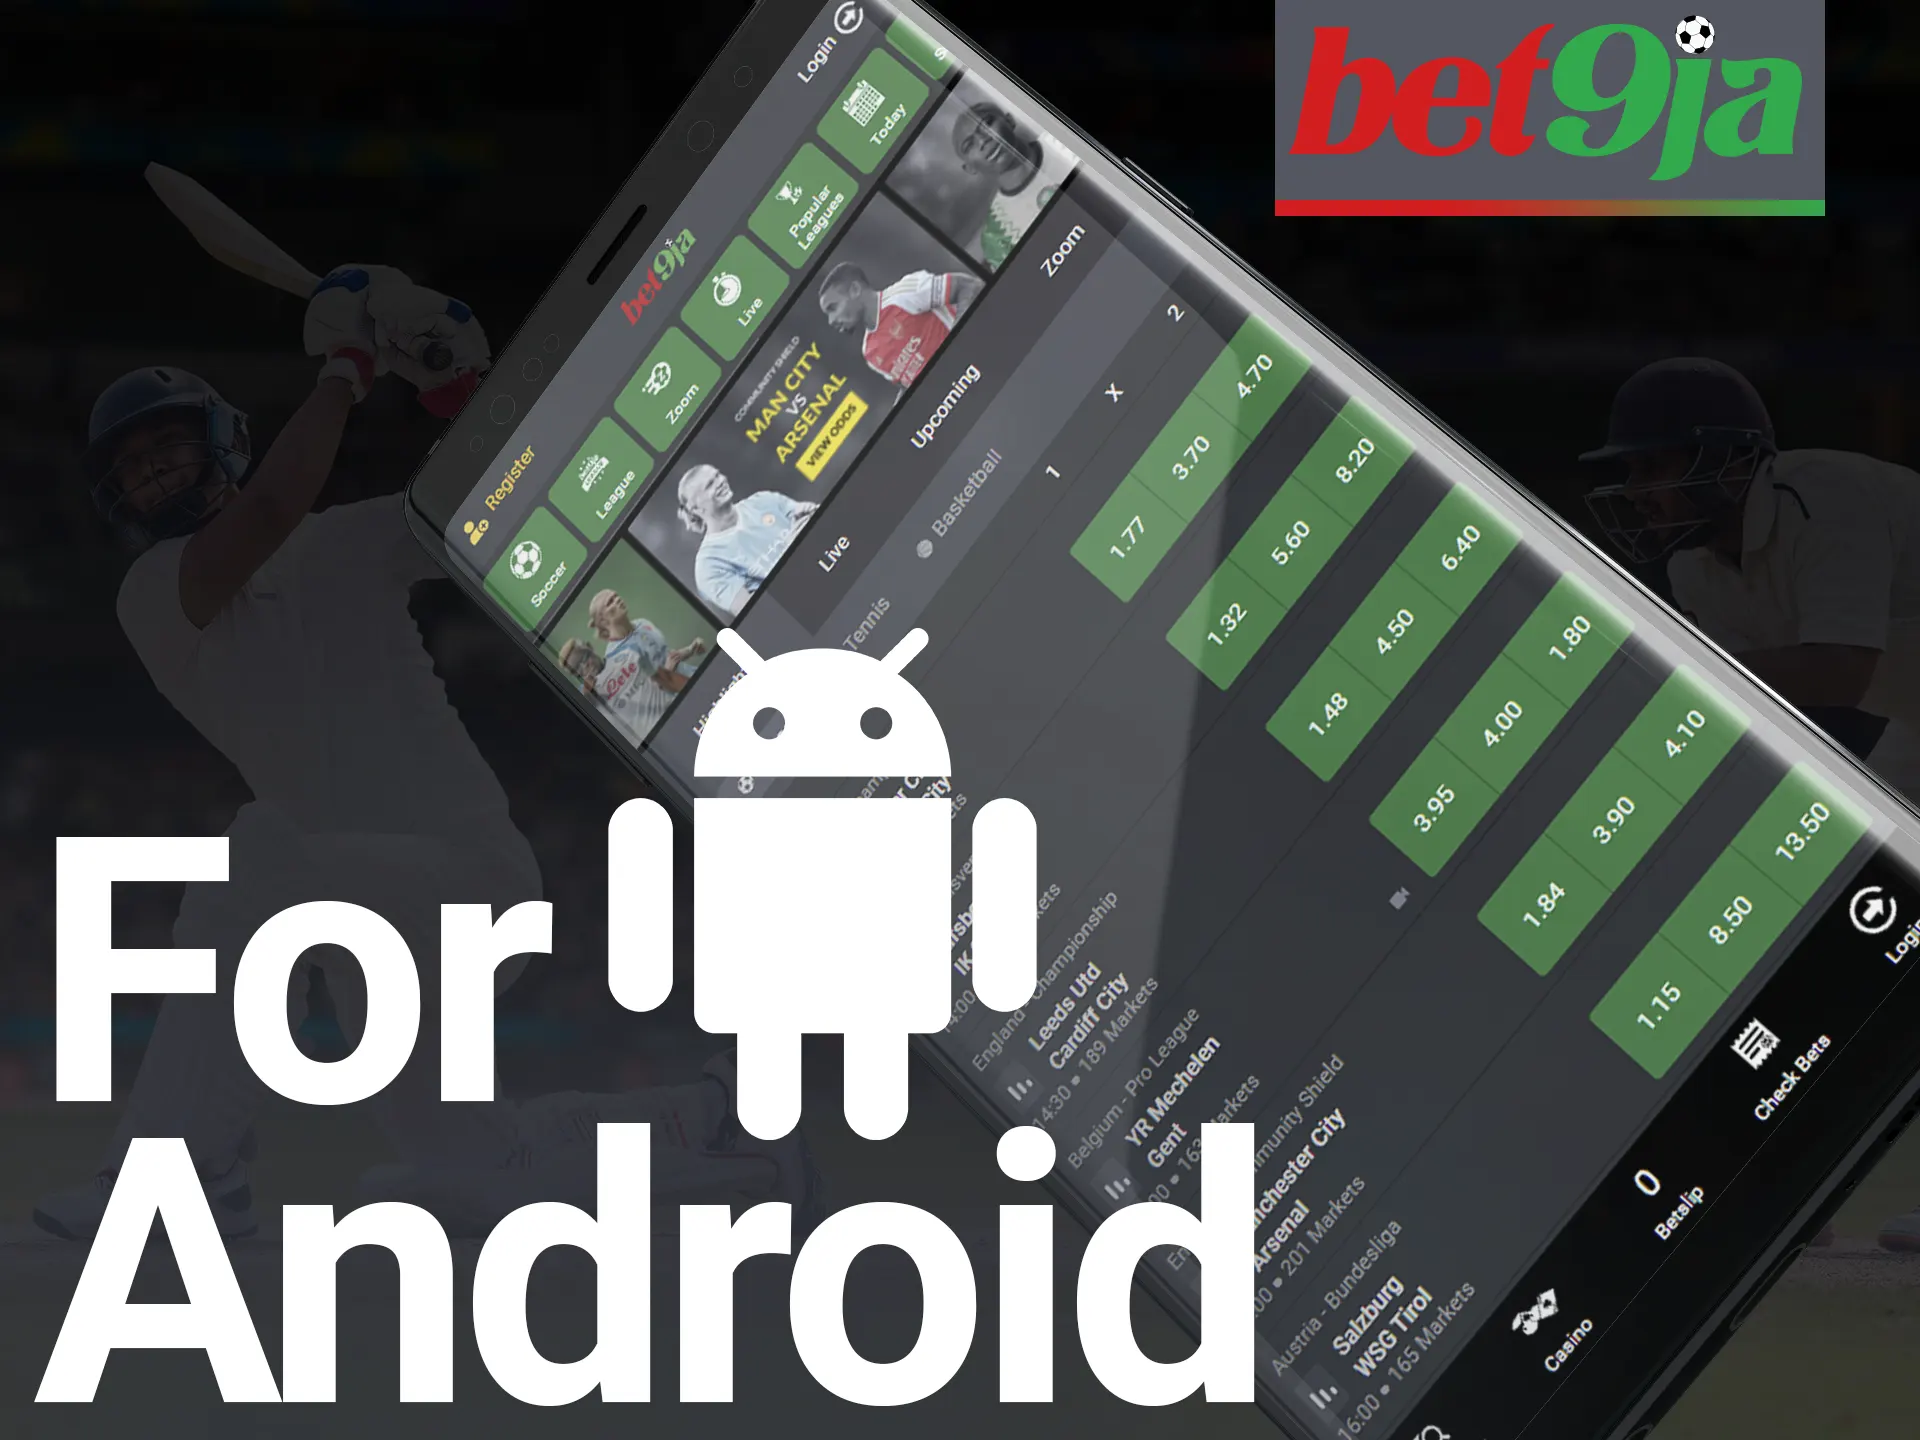 Place bets at bet9ja on your Android phone.